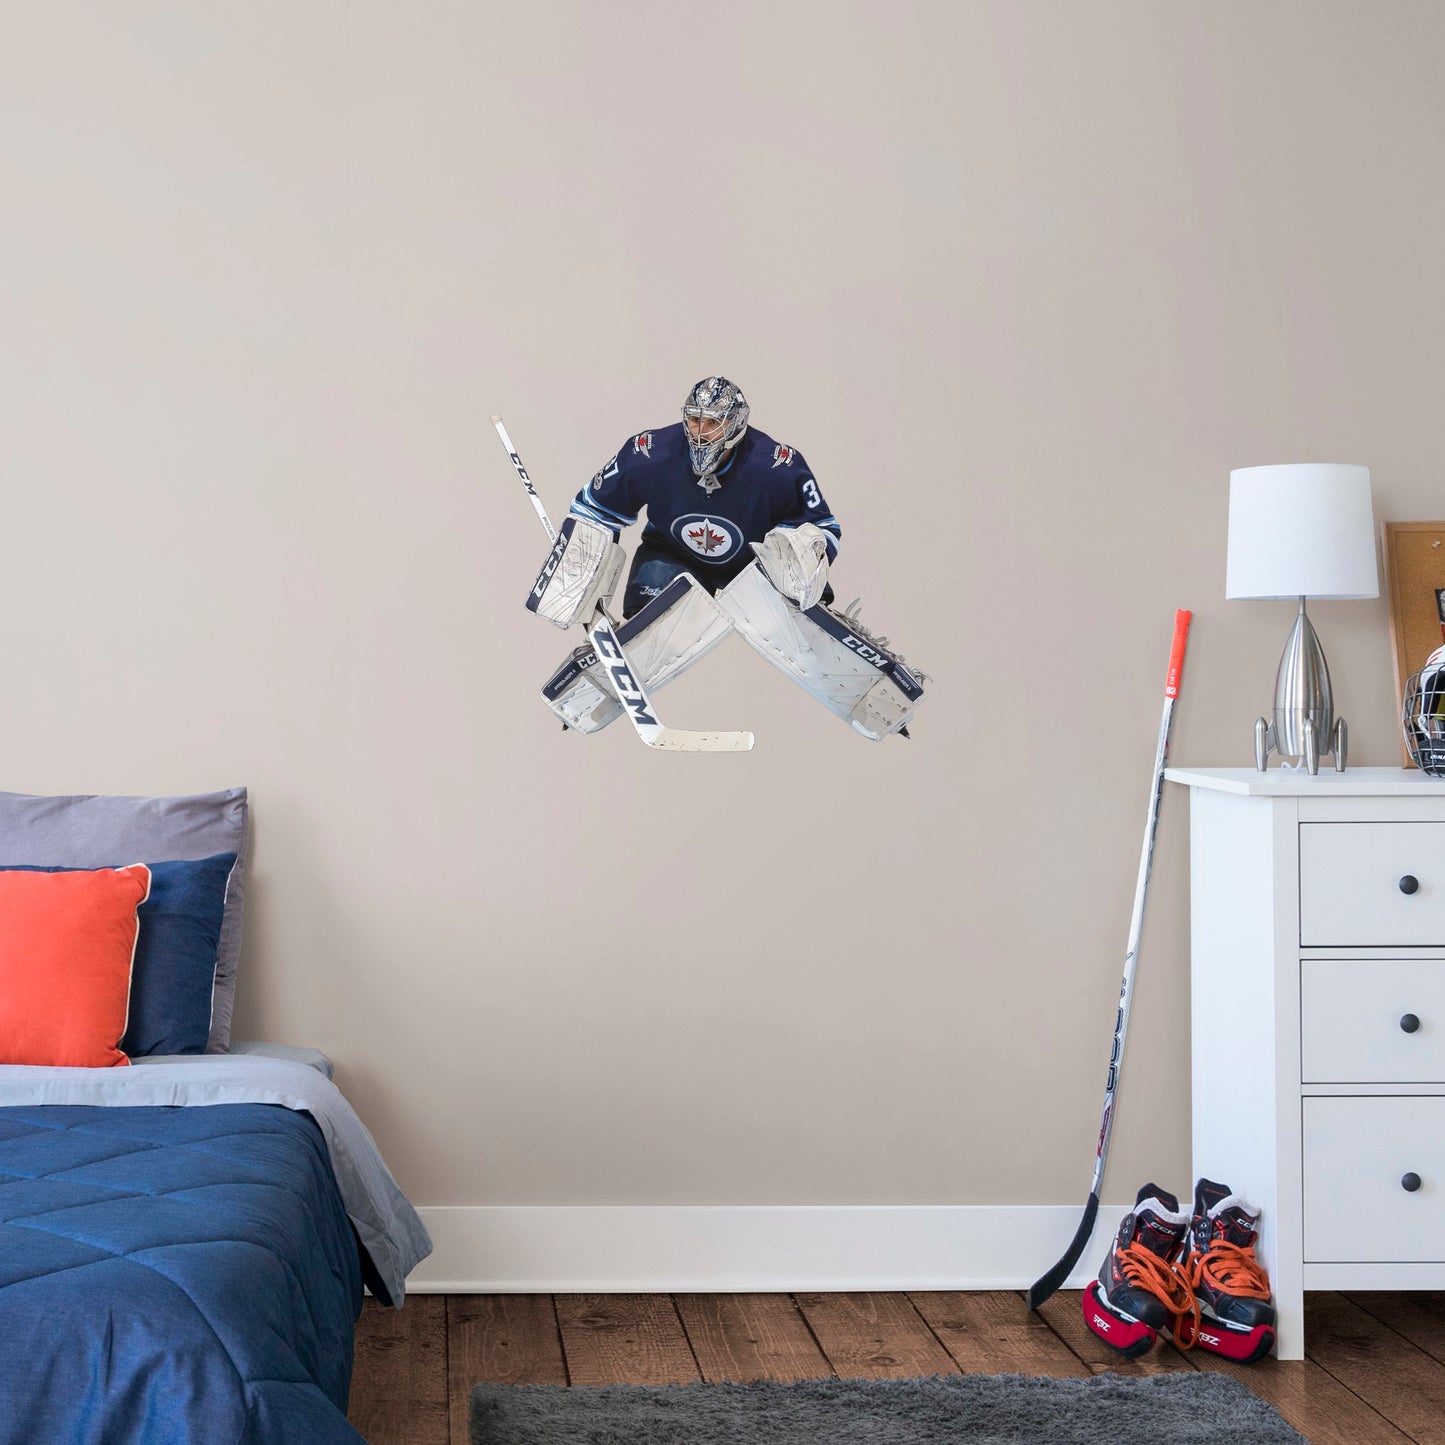 X-Large Athlete + 2 Decals (29"W x 25"H) Opposing teams should be worried when they see Connor Hellebuyck in the goal, and now you can bring his epic defense skills to life in your own home with this Officially Licensed NHL removable wall decal. Pictured here ready to stop any puck that comes his way, this wall decal of Hellebuyck will make the perfect addition to your bedroom, office, or fan room, and it even makes a great gift for your favorite Jets fanatic!